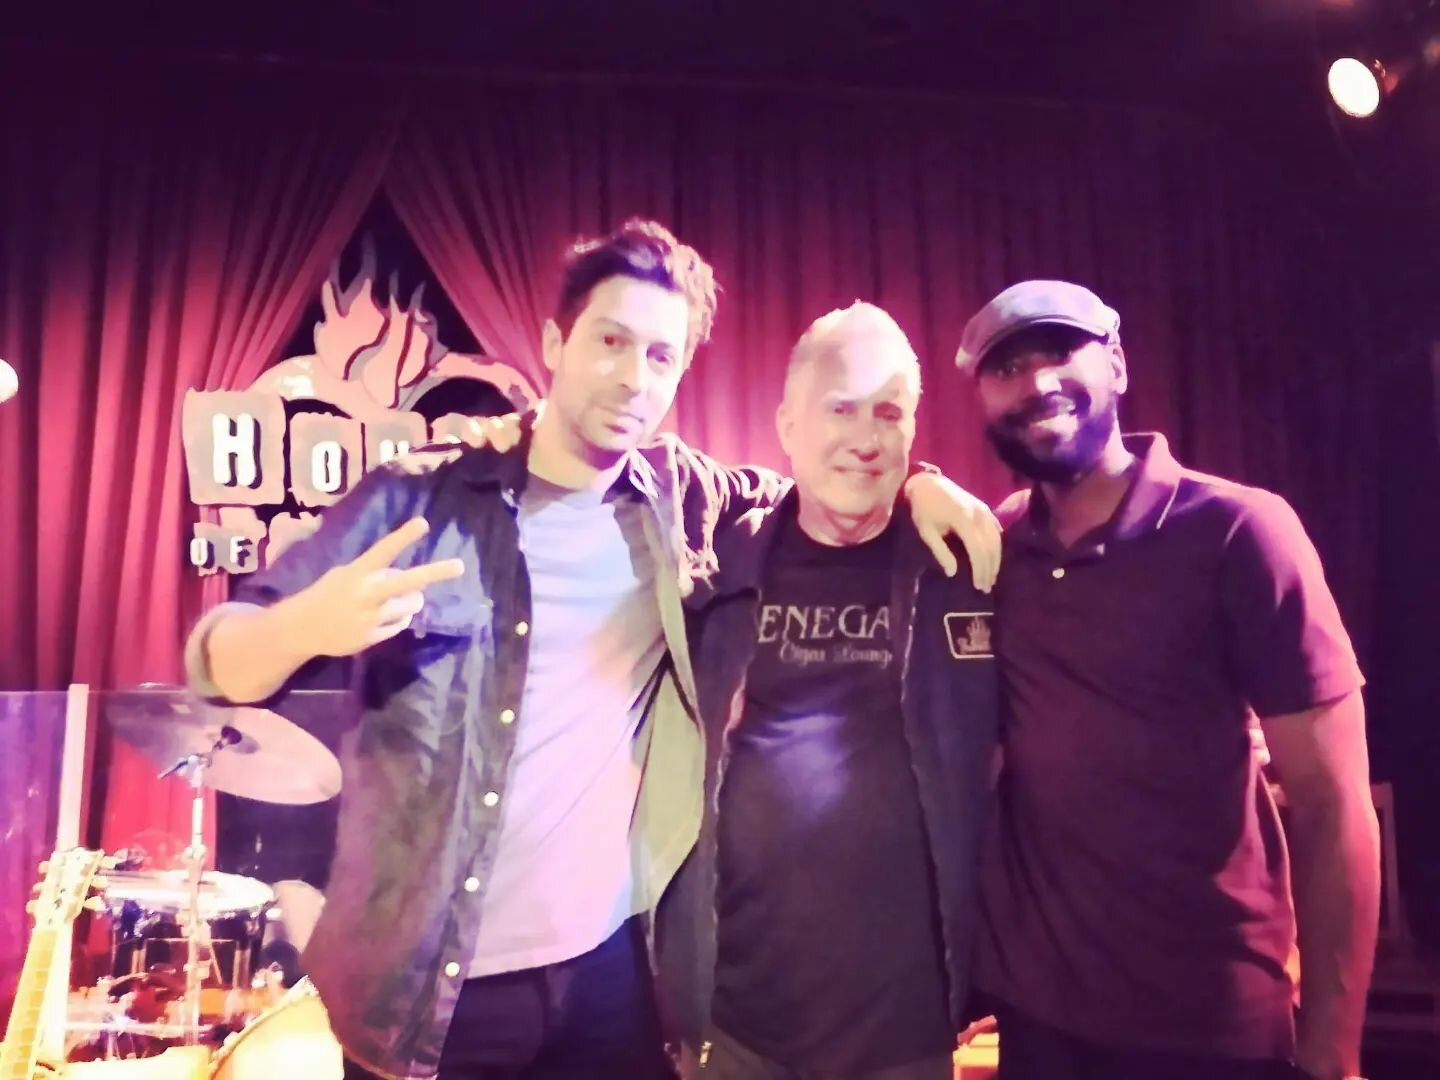 This past Saturday I headlined at the House of Blues in Chicago, IL...I had Kenny Smith on drums and look who showed up...ANSON FUNDERBURGH! We talked about the new album and he sat in with us. He told me he is going to teach me how to swing a mean d